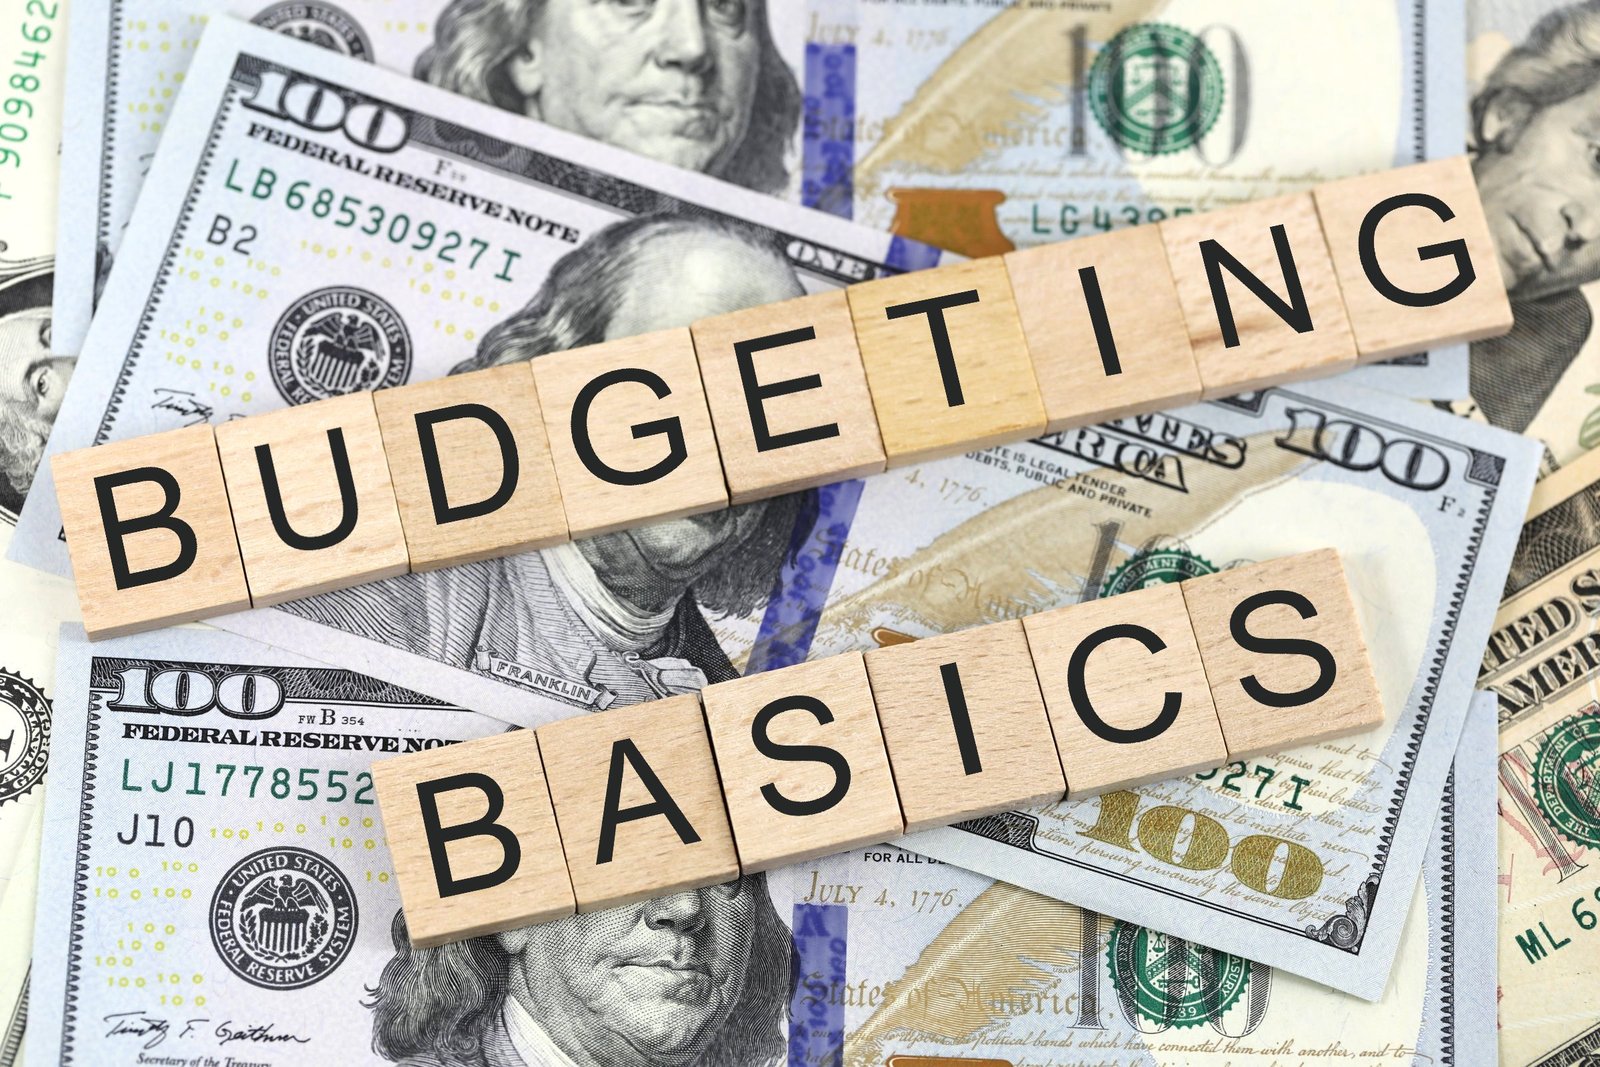 Budgeting Essentials: Allocating Funds for Transportation, Accommodation, and Activities